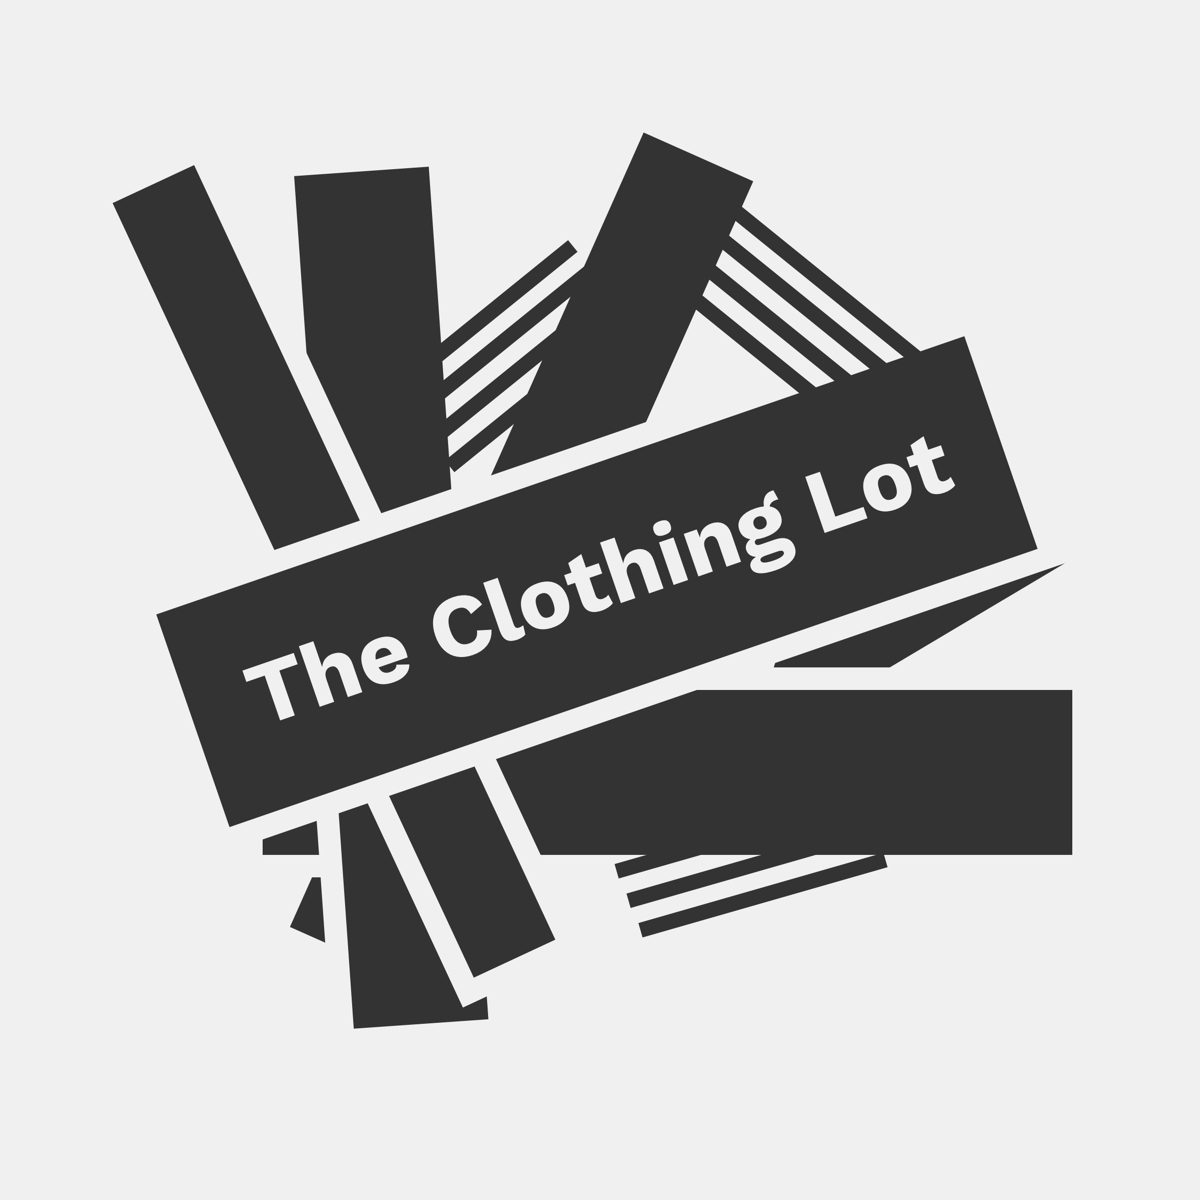 The Clothing Lot